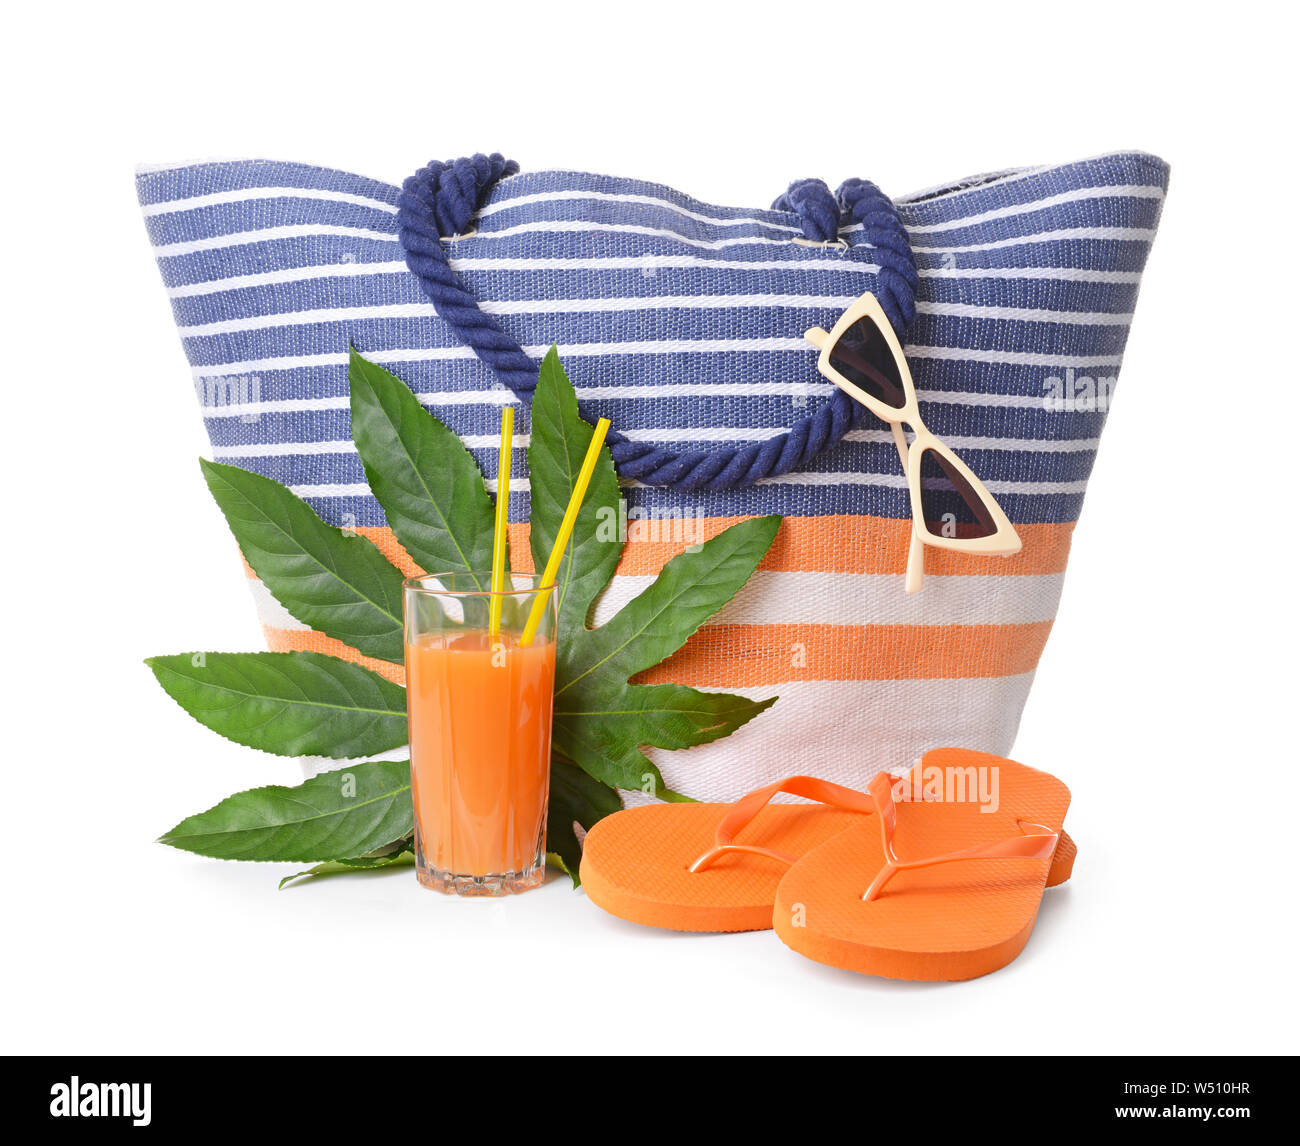 Beach bag, accessories and cocktail on white background Stock Photo